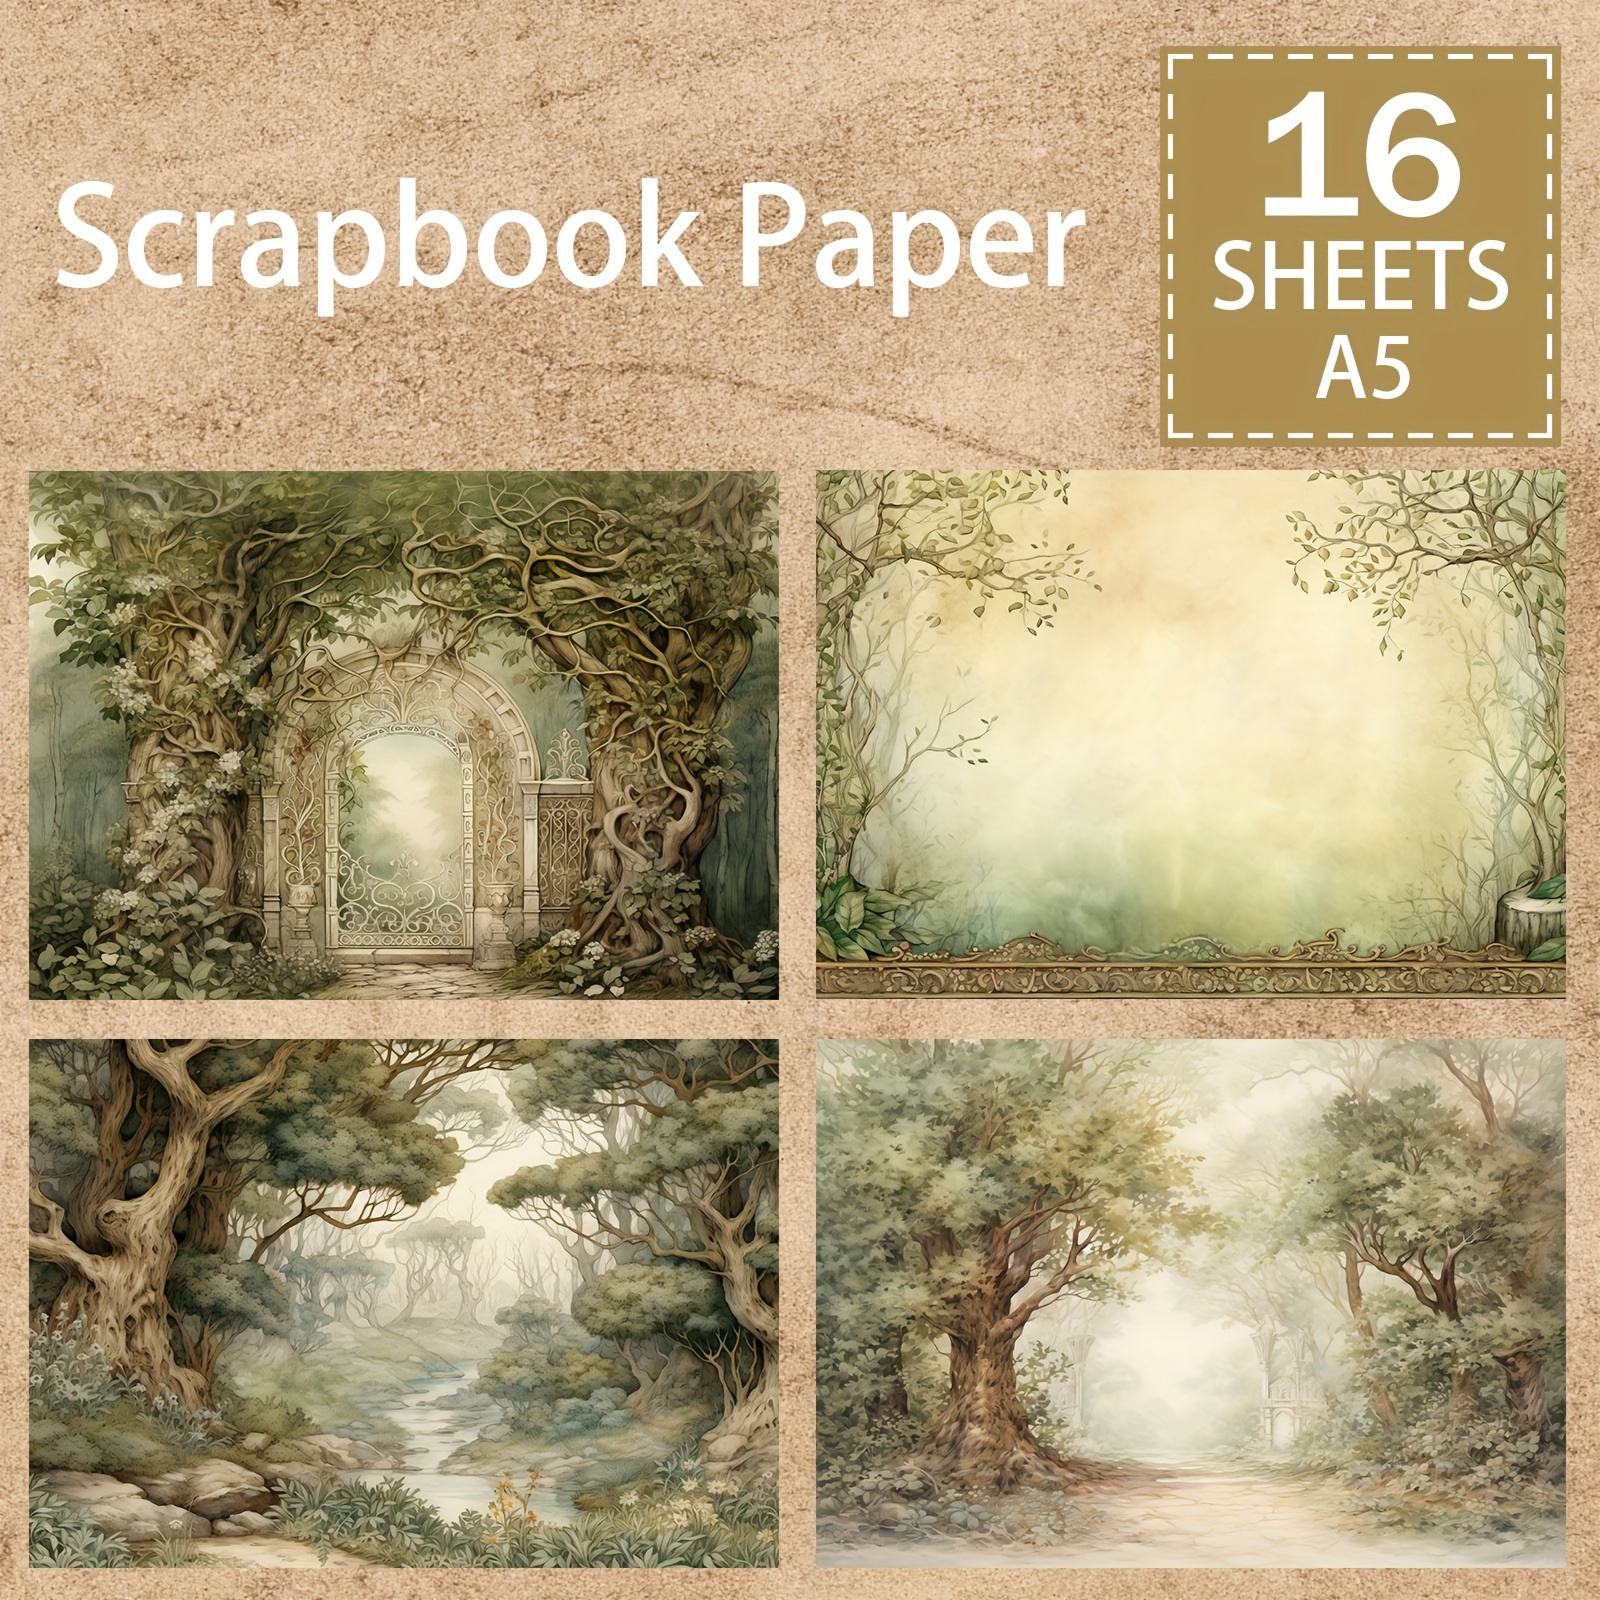 

16 Sheets A5 Vintage Forest Trees Stone Gate Decorative Scrapbook Paper For Diy Crafts, Junk Journals, Greeting Cards, And Planner Backgrounds - High-quality Bristol Paper Material